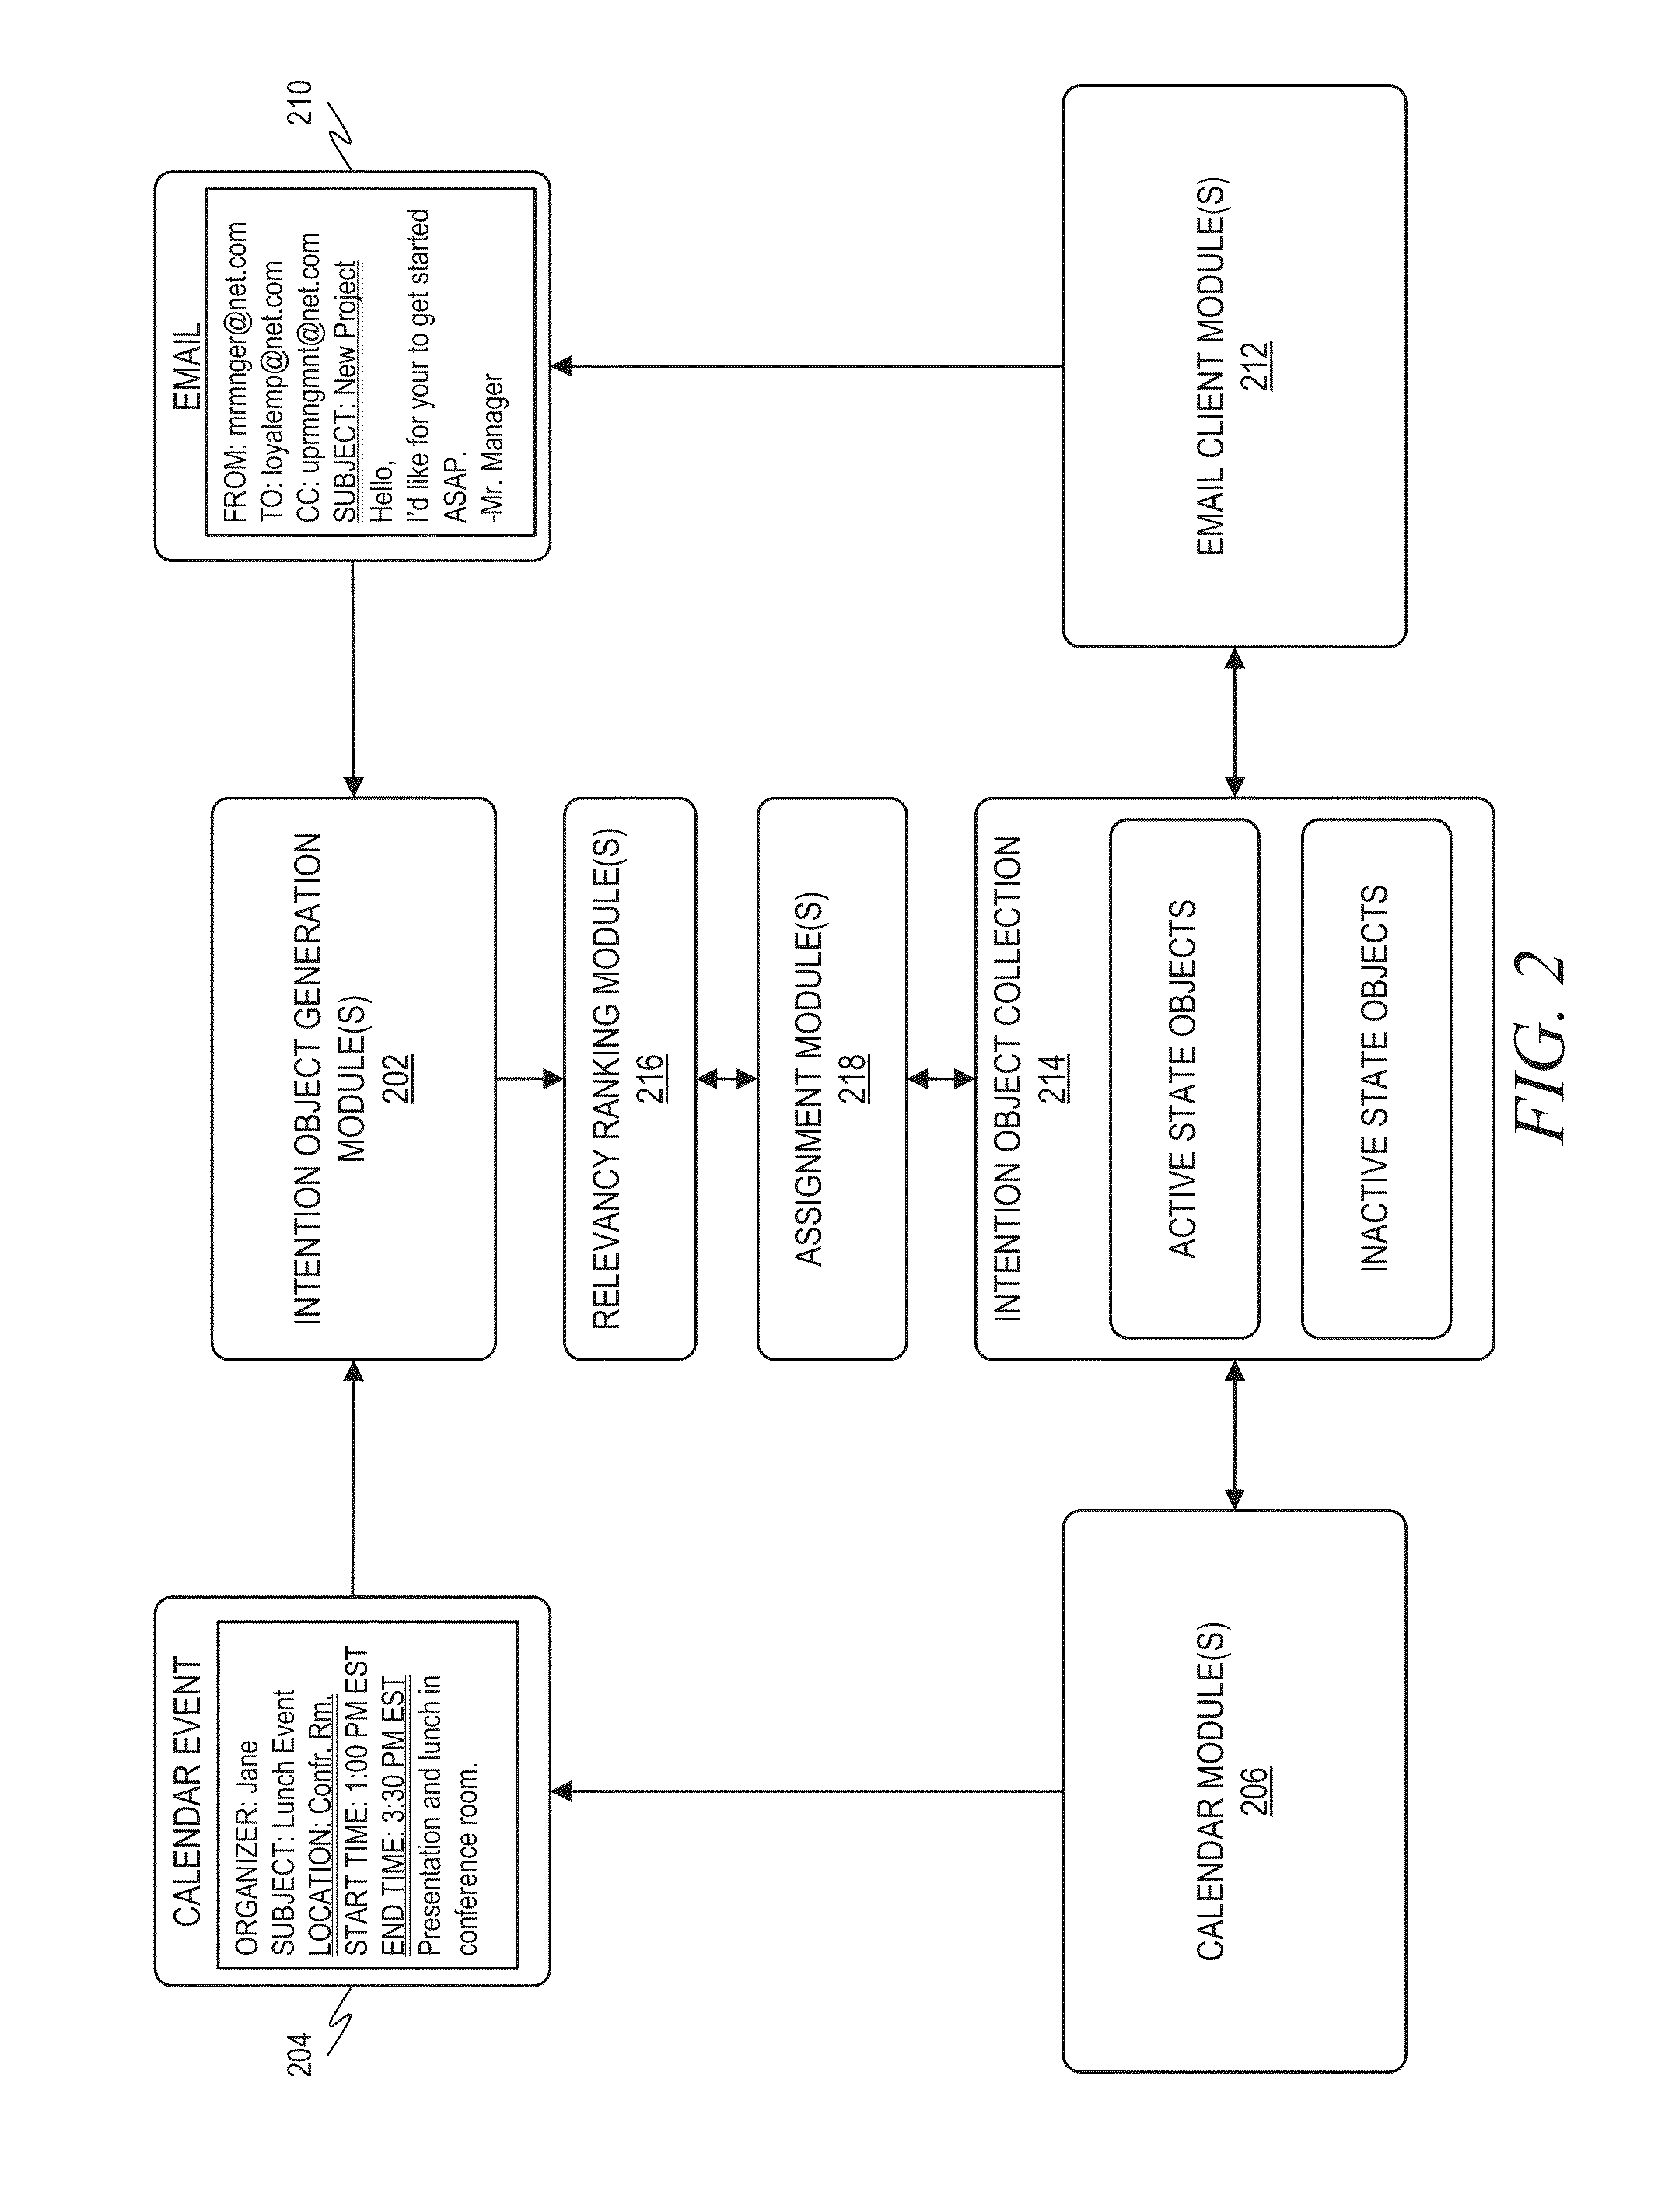 System and method for activity management presentation